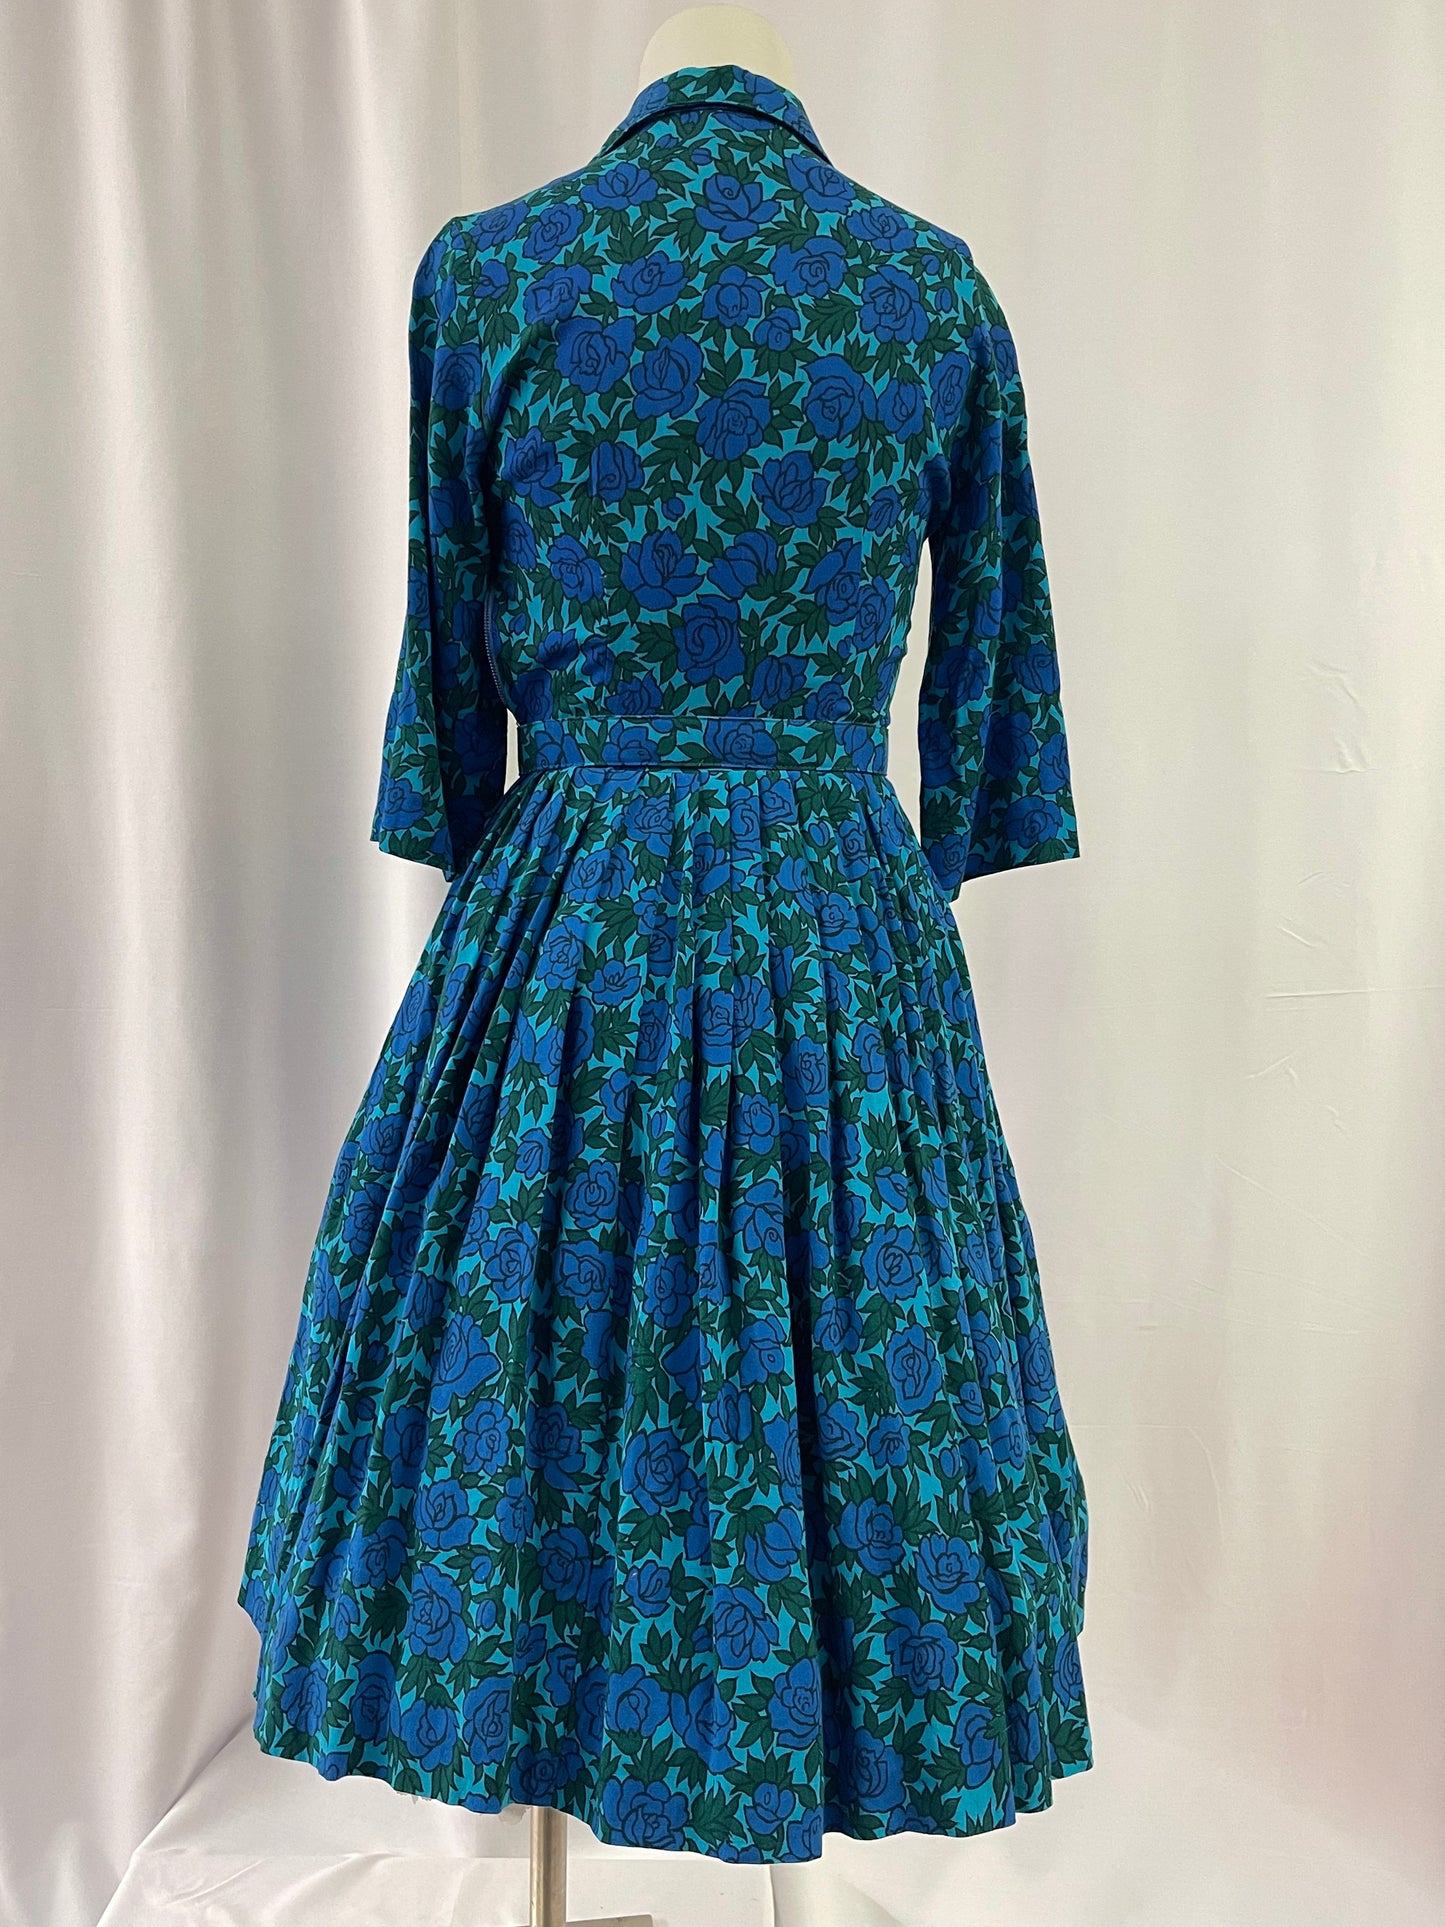 50s Blue and Green Floral Print Dress